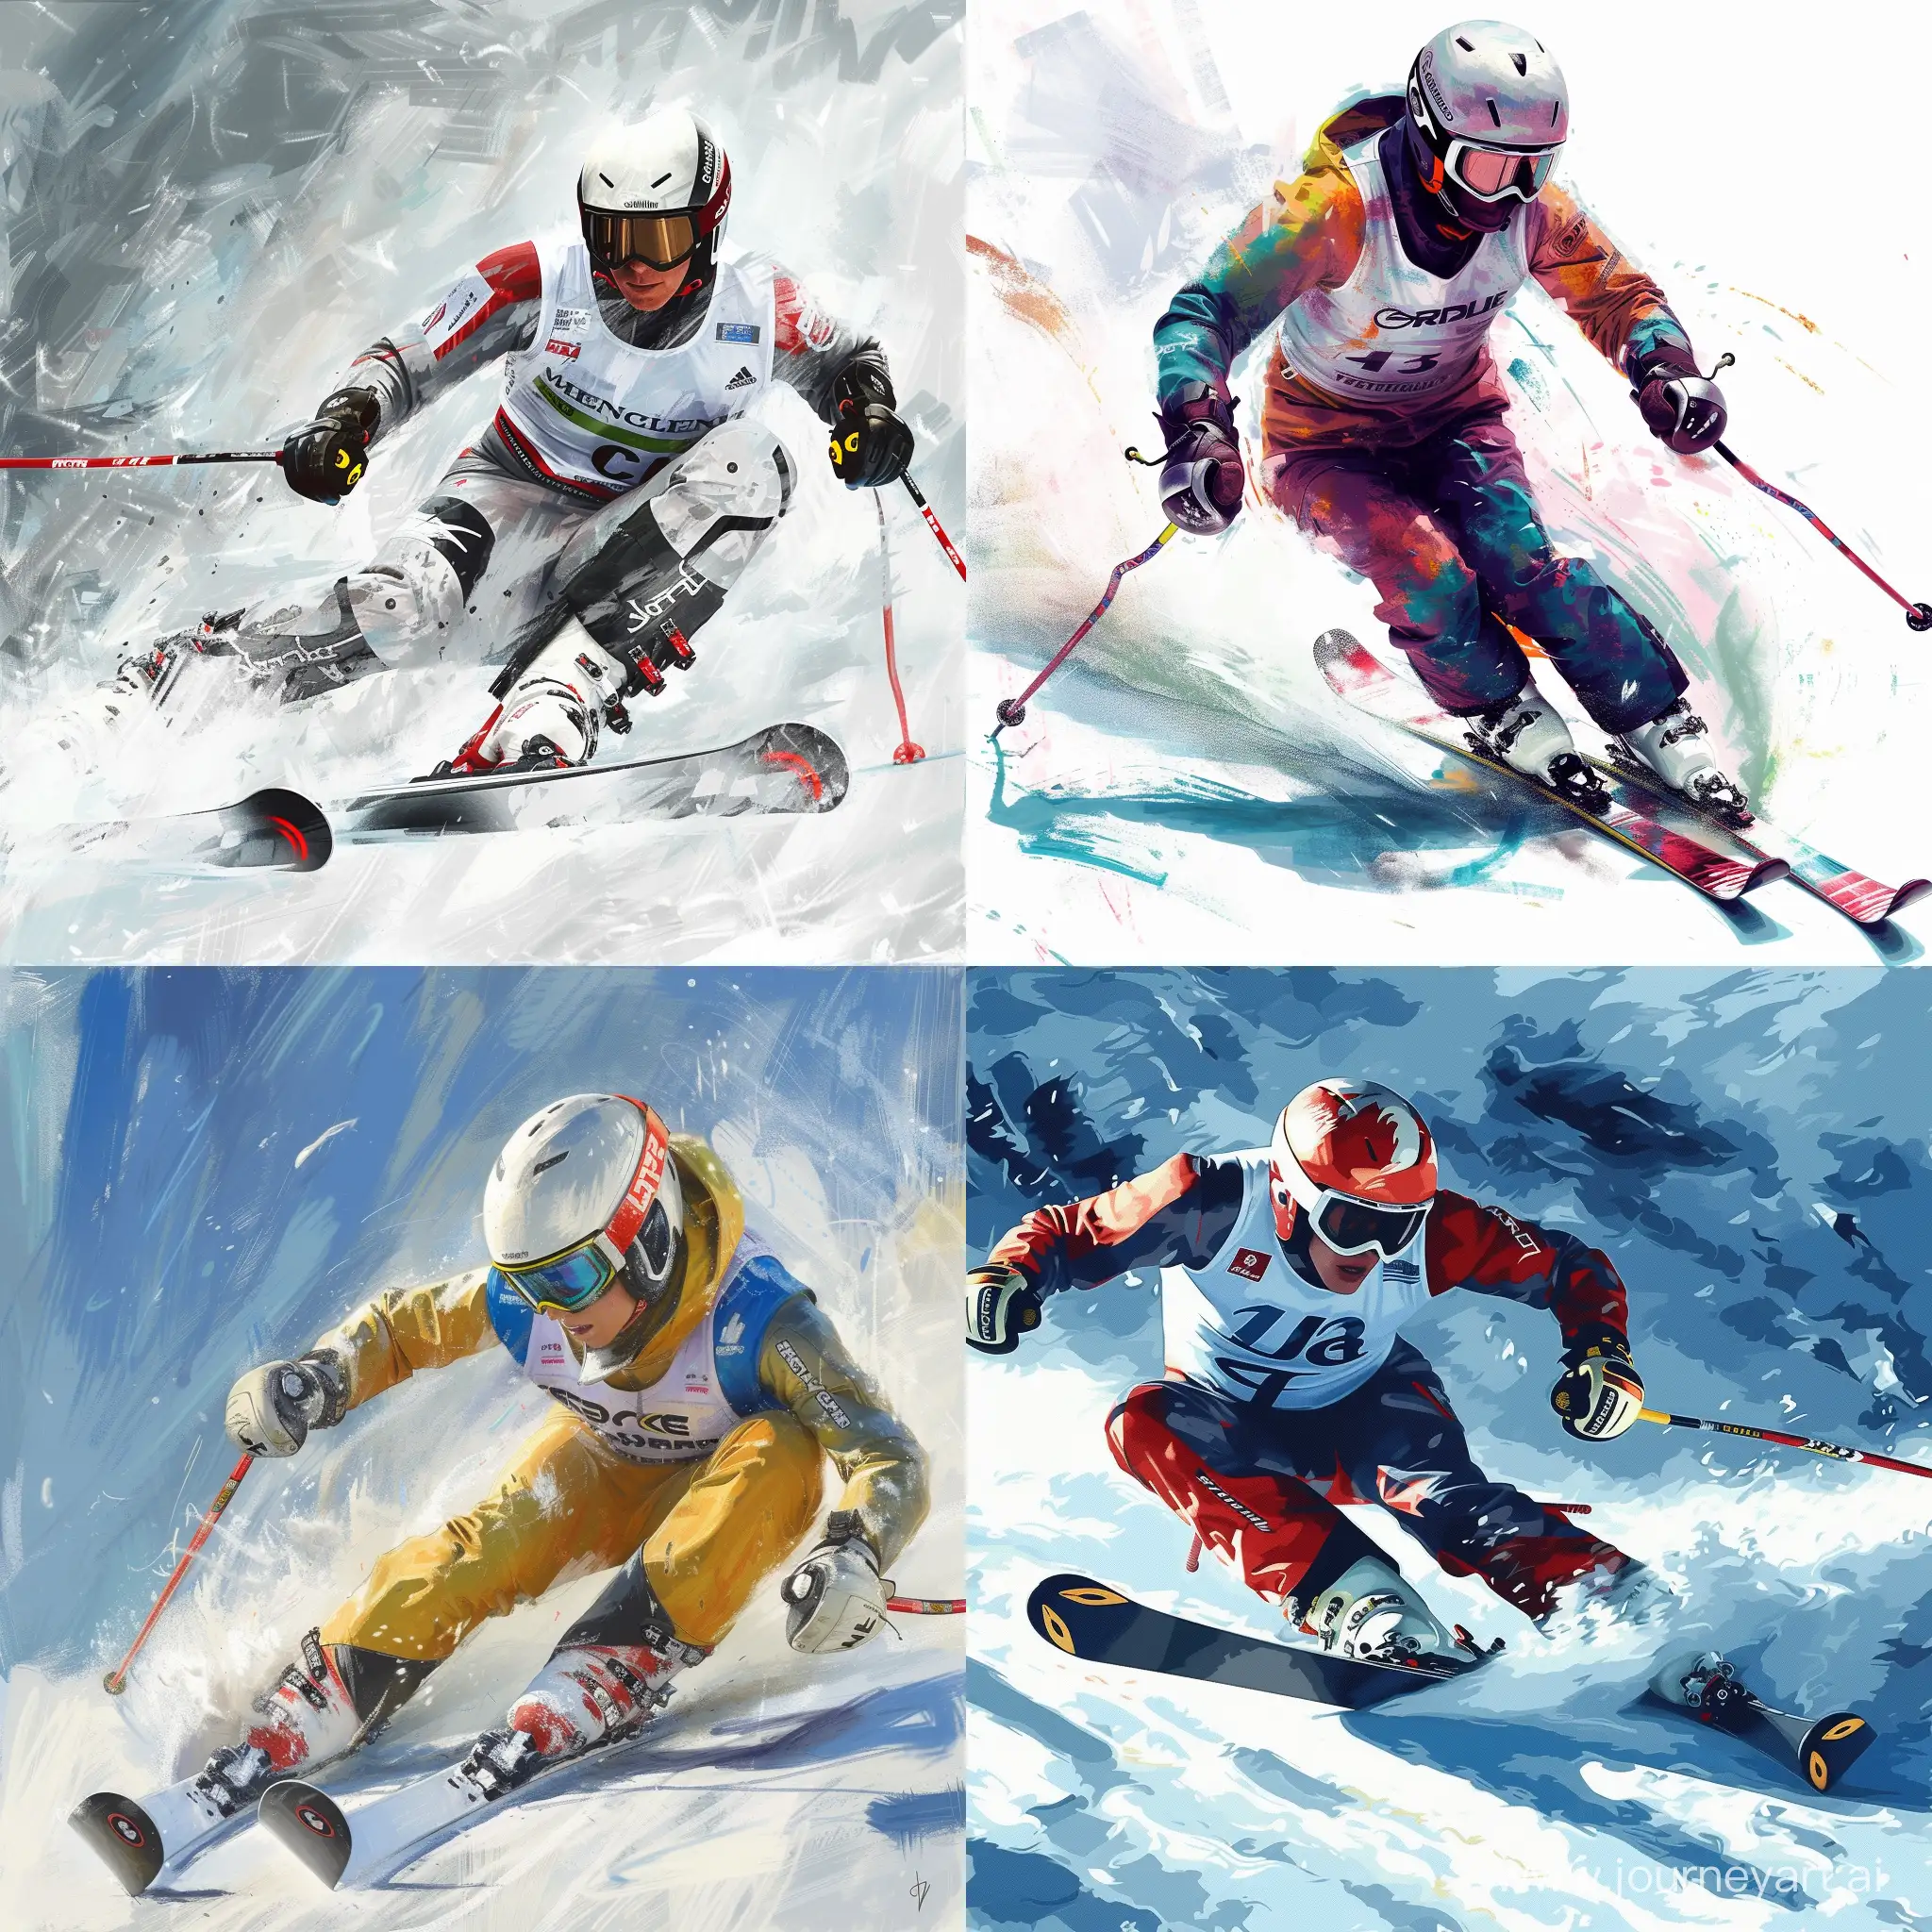 Dynamic-Skier-Racer-in-Action-on-Snowy-Slopes